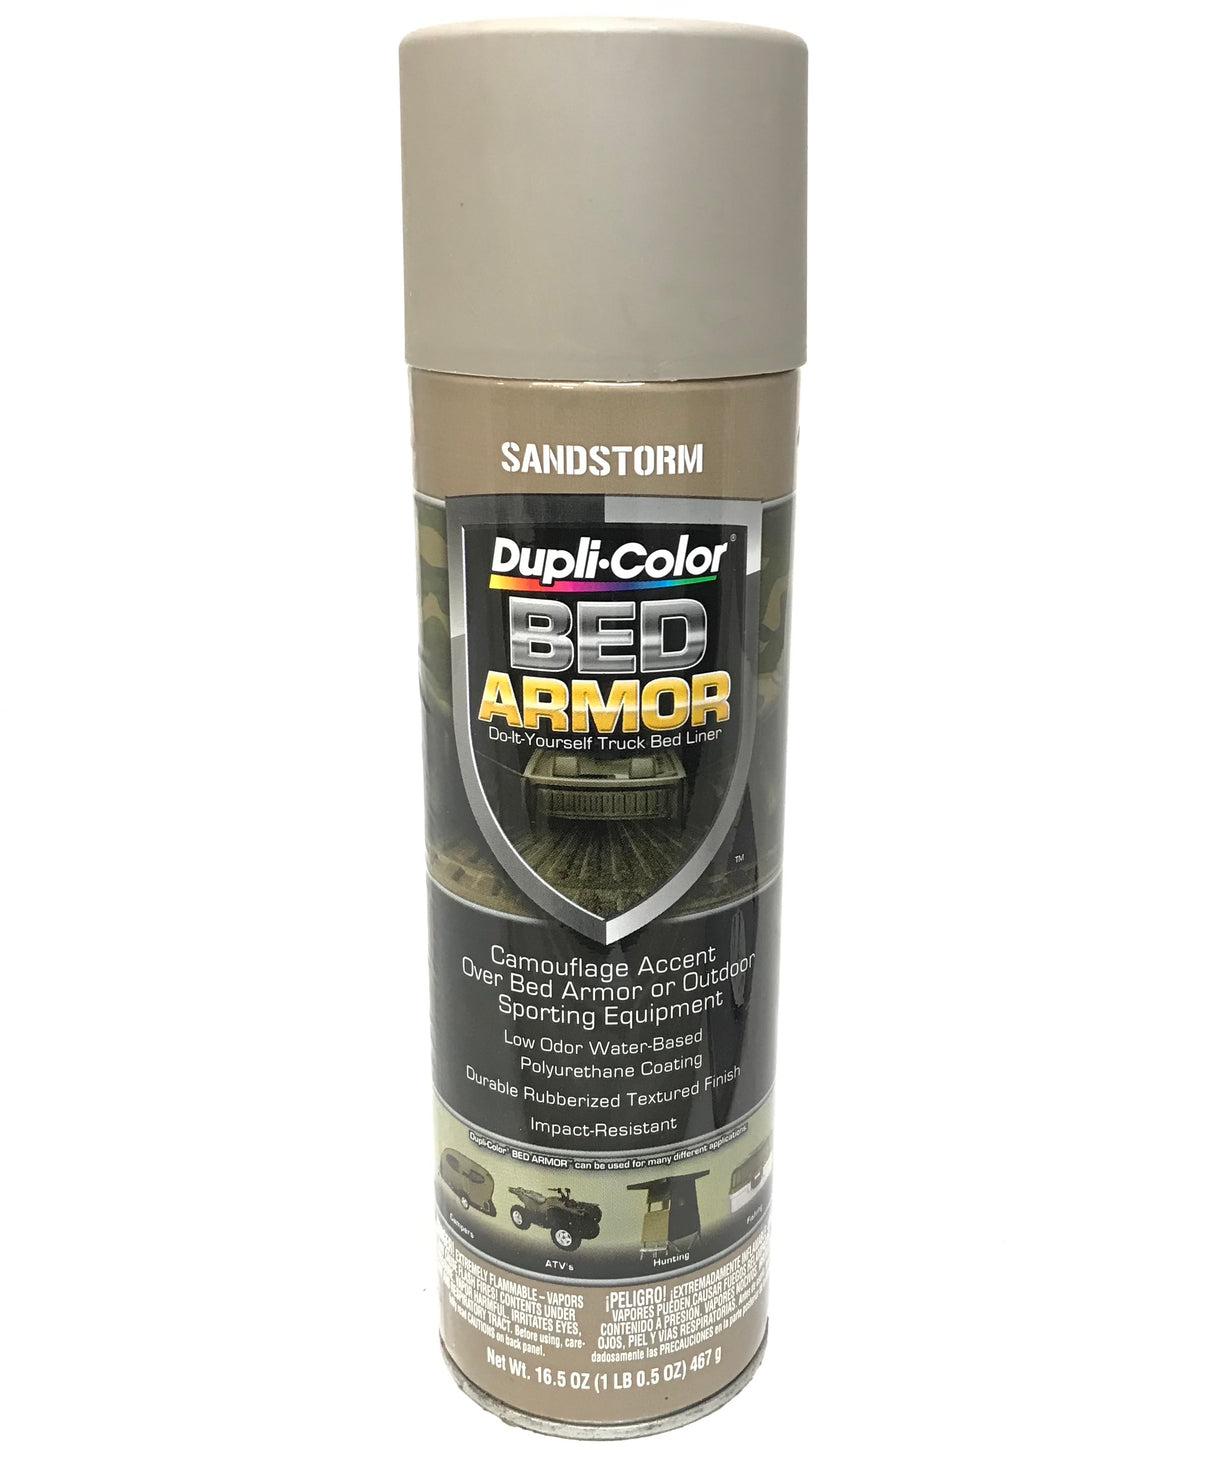 Duplicolor BAA2030 Sandstorm Camouflage Bed Armor - Rubberized Textured Finish - Low Odor - Water Based - Durable - 16.5 oz